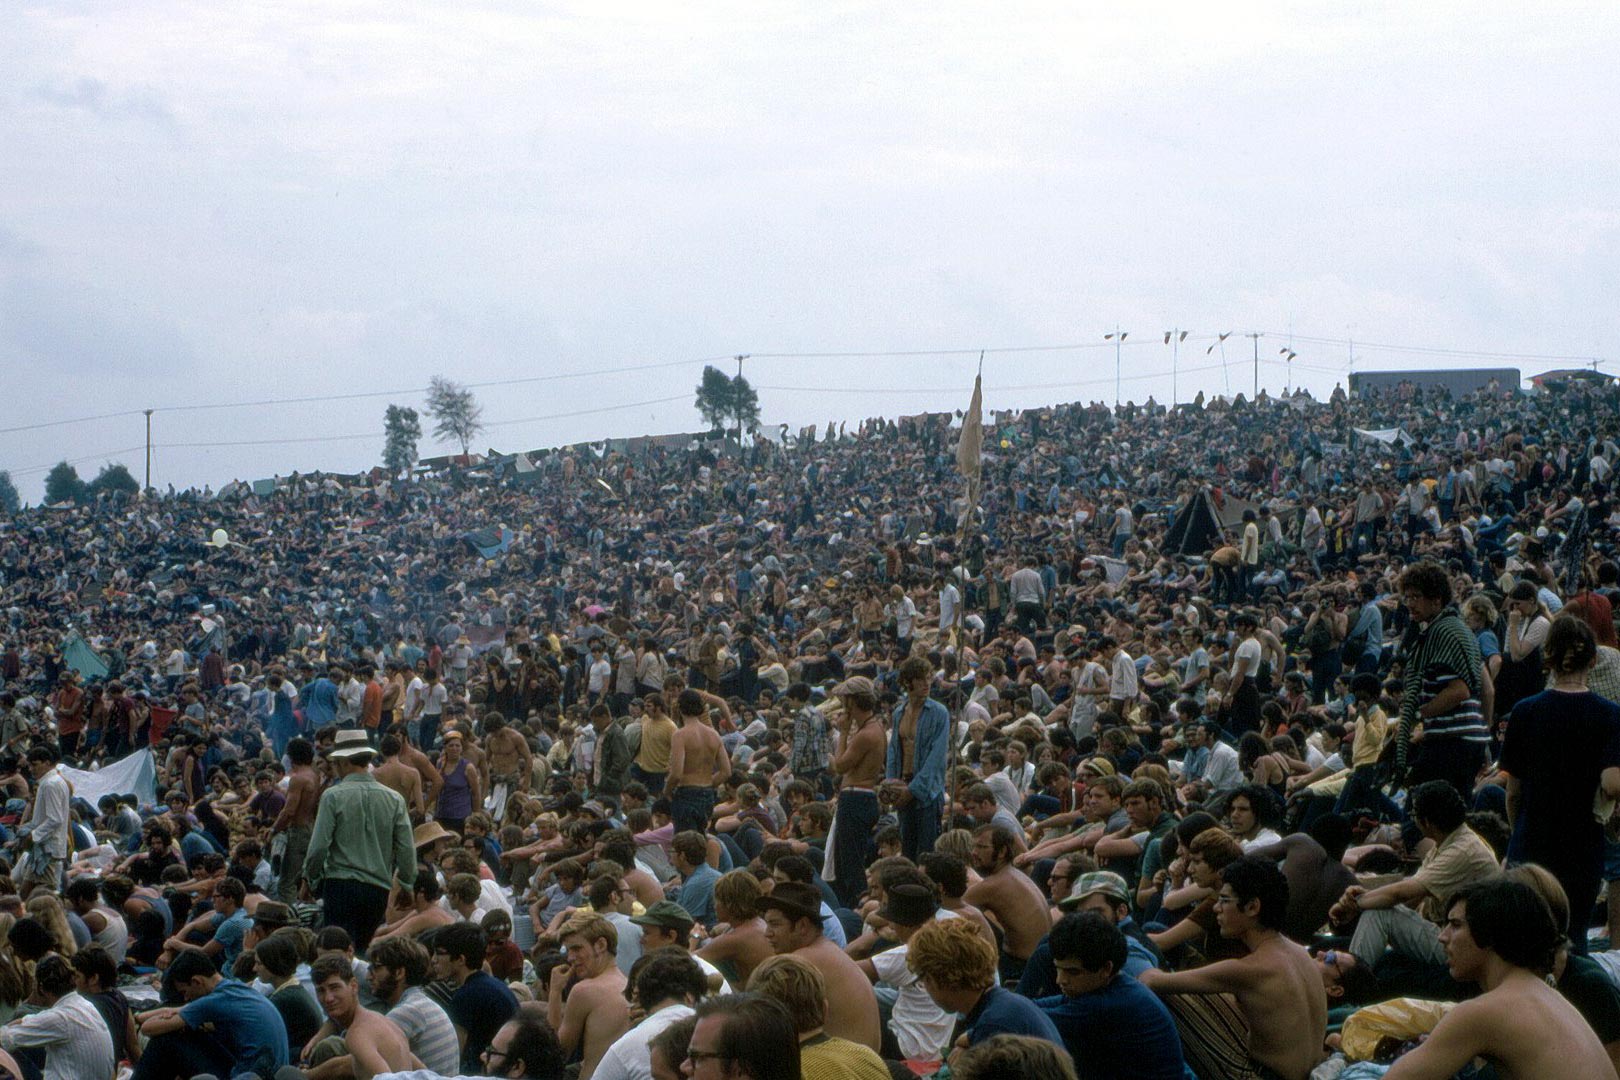 Crowd of people at Woodstock on the back field